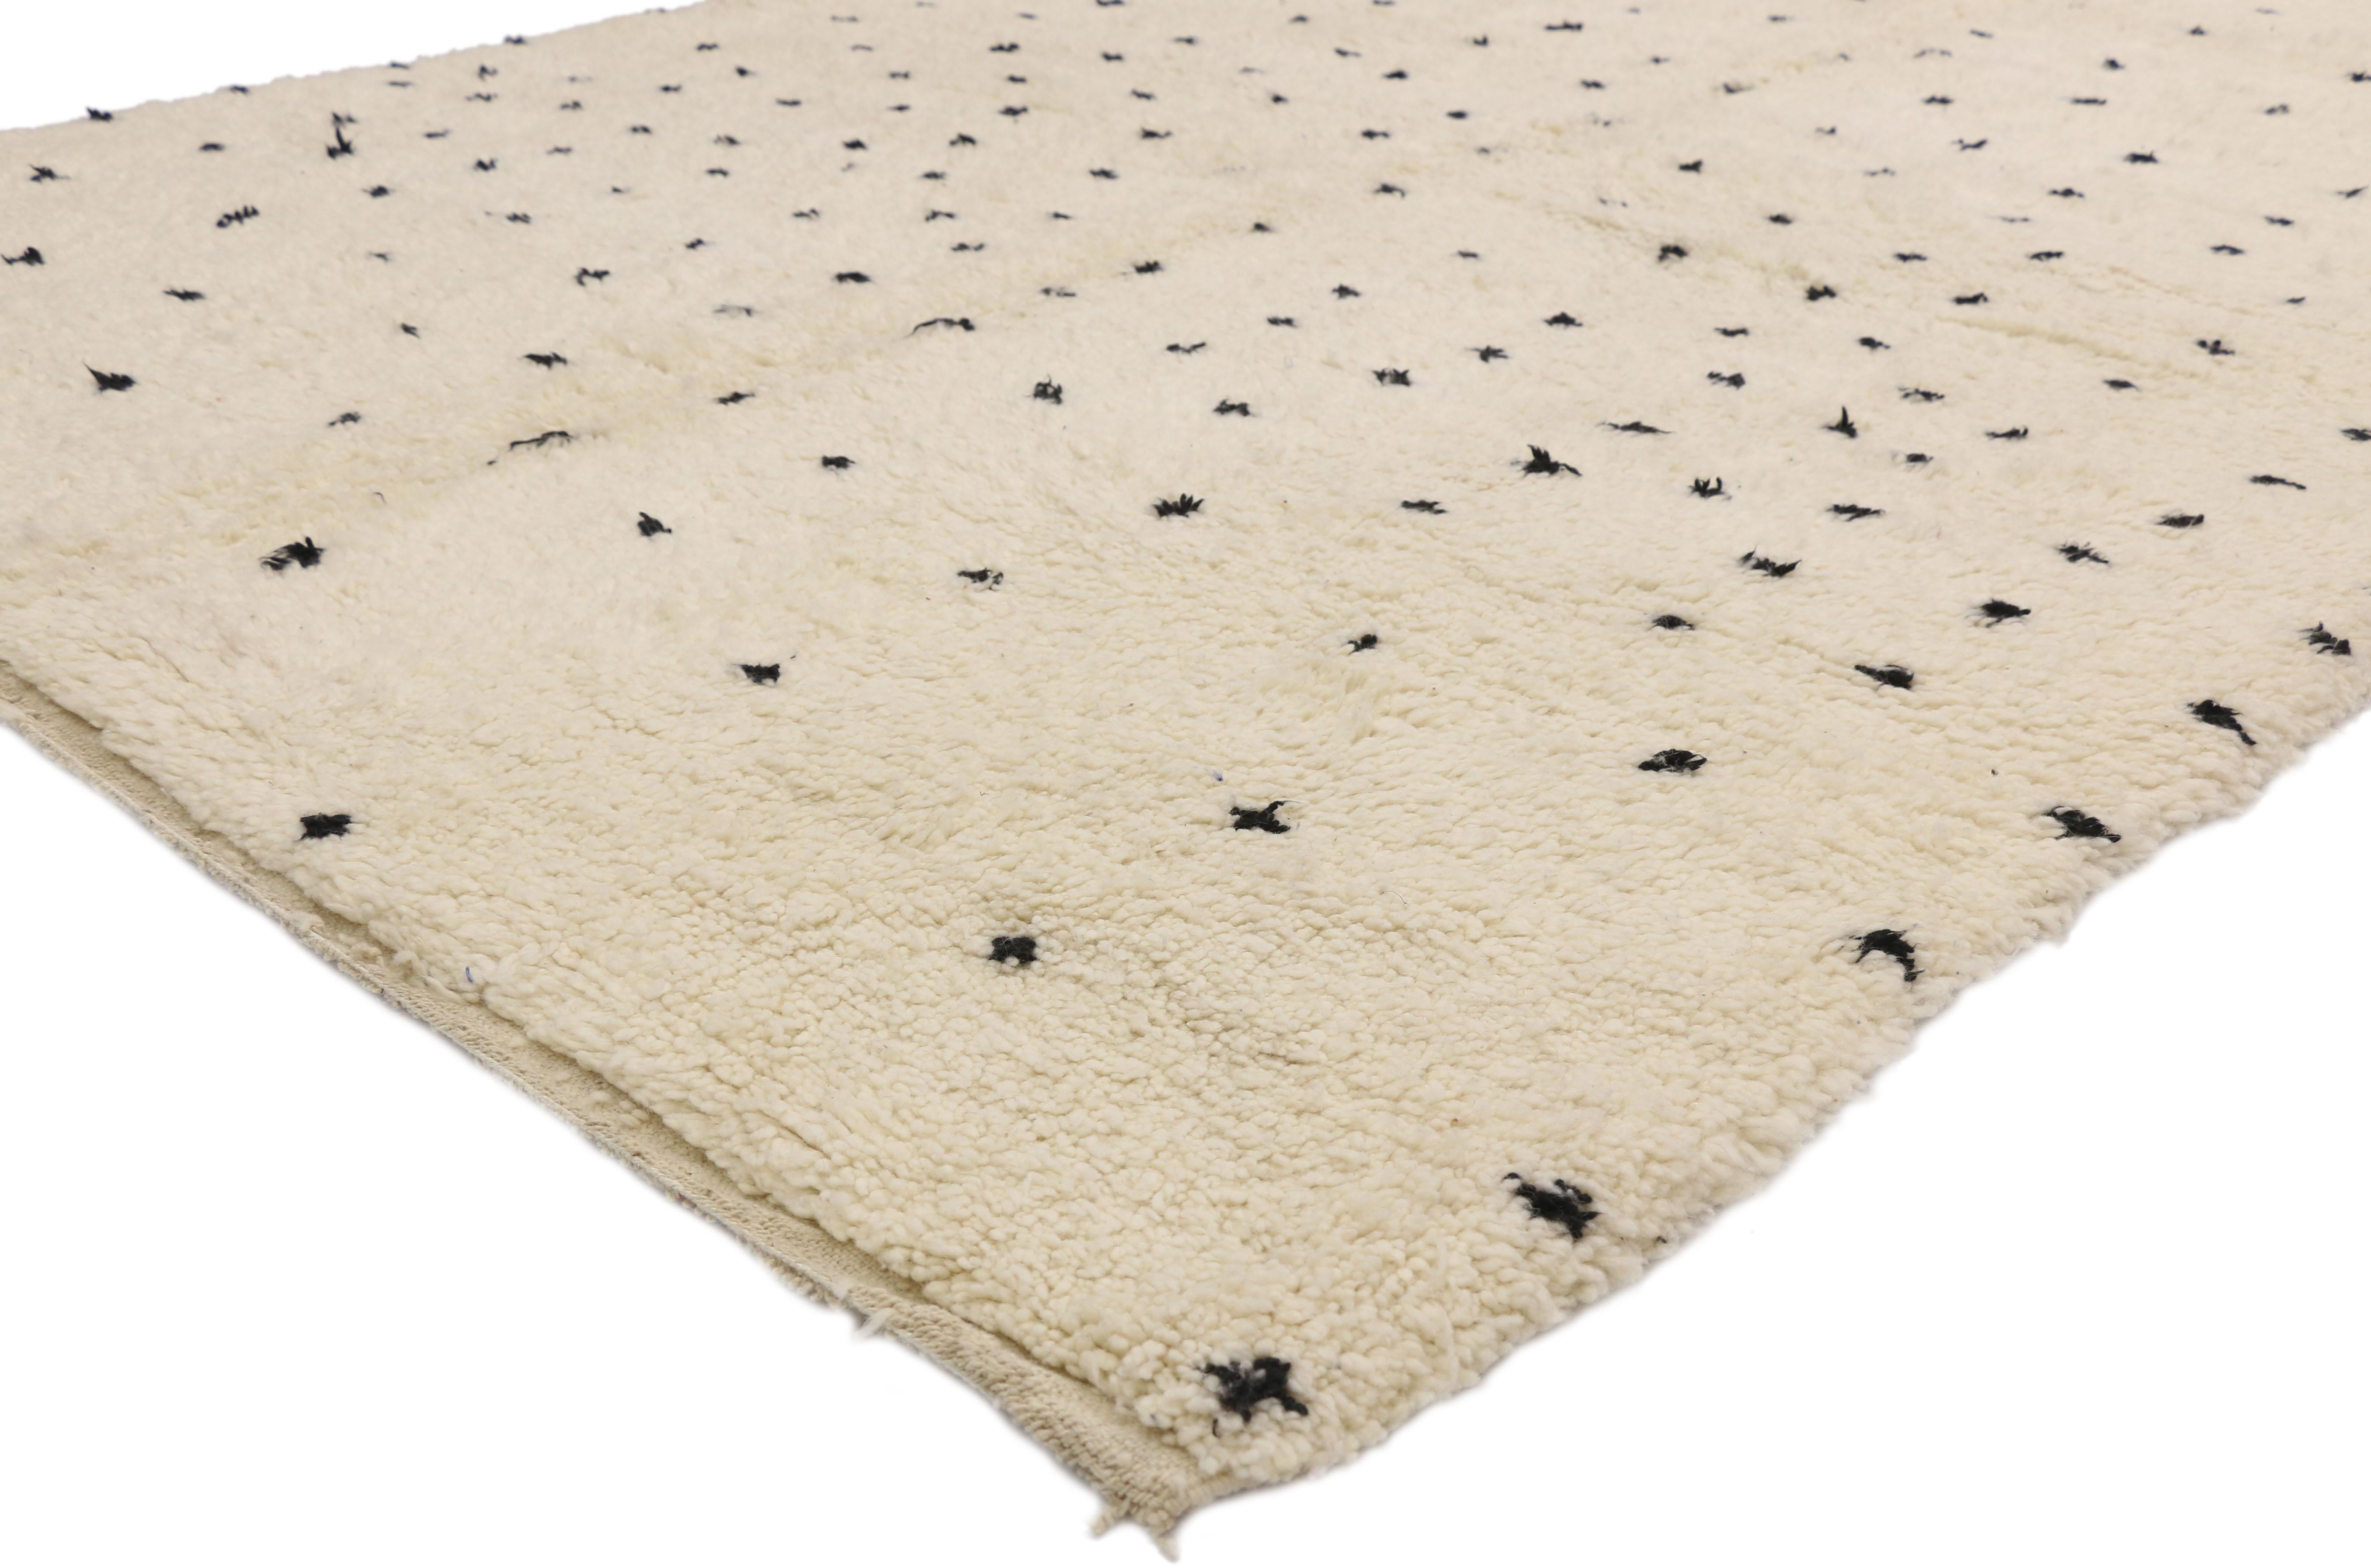 20785, new Berber Moroccan rug inspired by Yayoi Kusama Polka Dot Motifs. This gorgeous hand knotted wool contemporary Berber Moroccan rug features a playful all-over confetti pattern steeped in Berber tribal symbolism. The sprinkle pattern is a